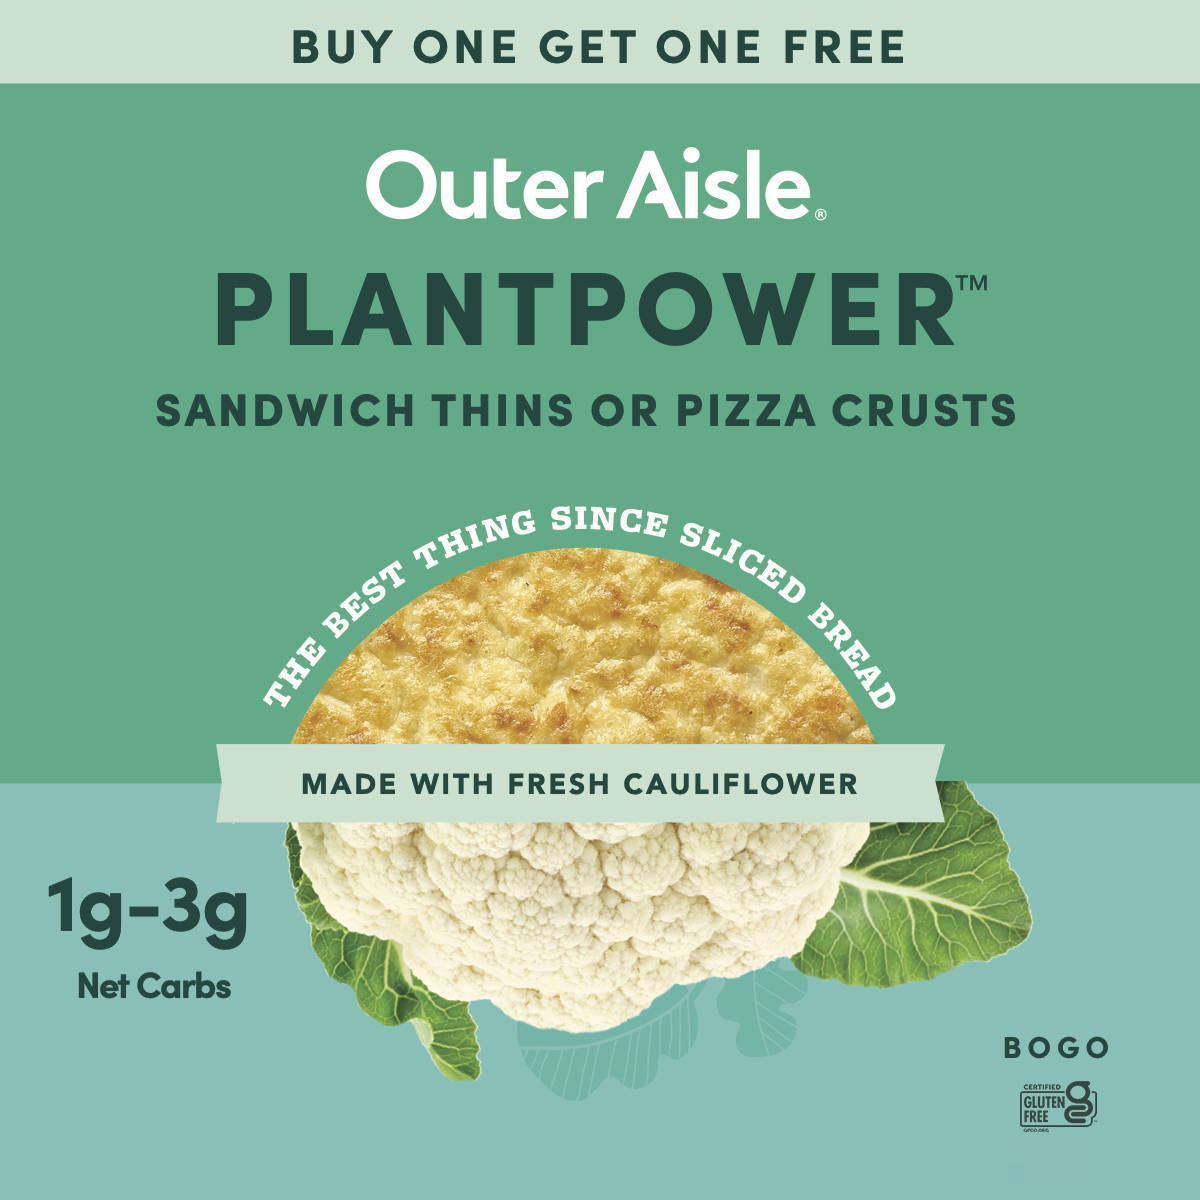 buy one outer aisle item, get one free banner with pizza crusts and sandwich thins